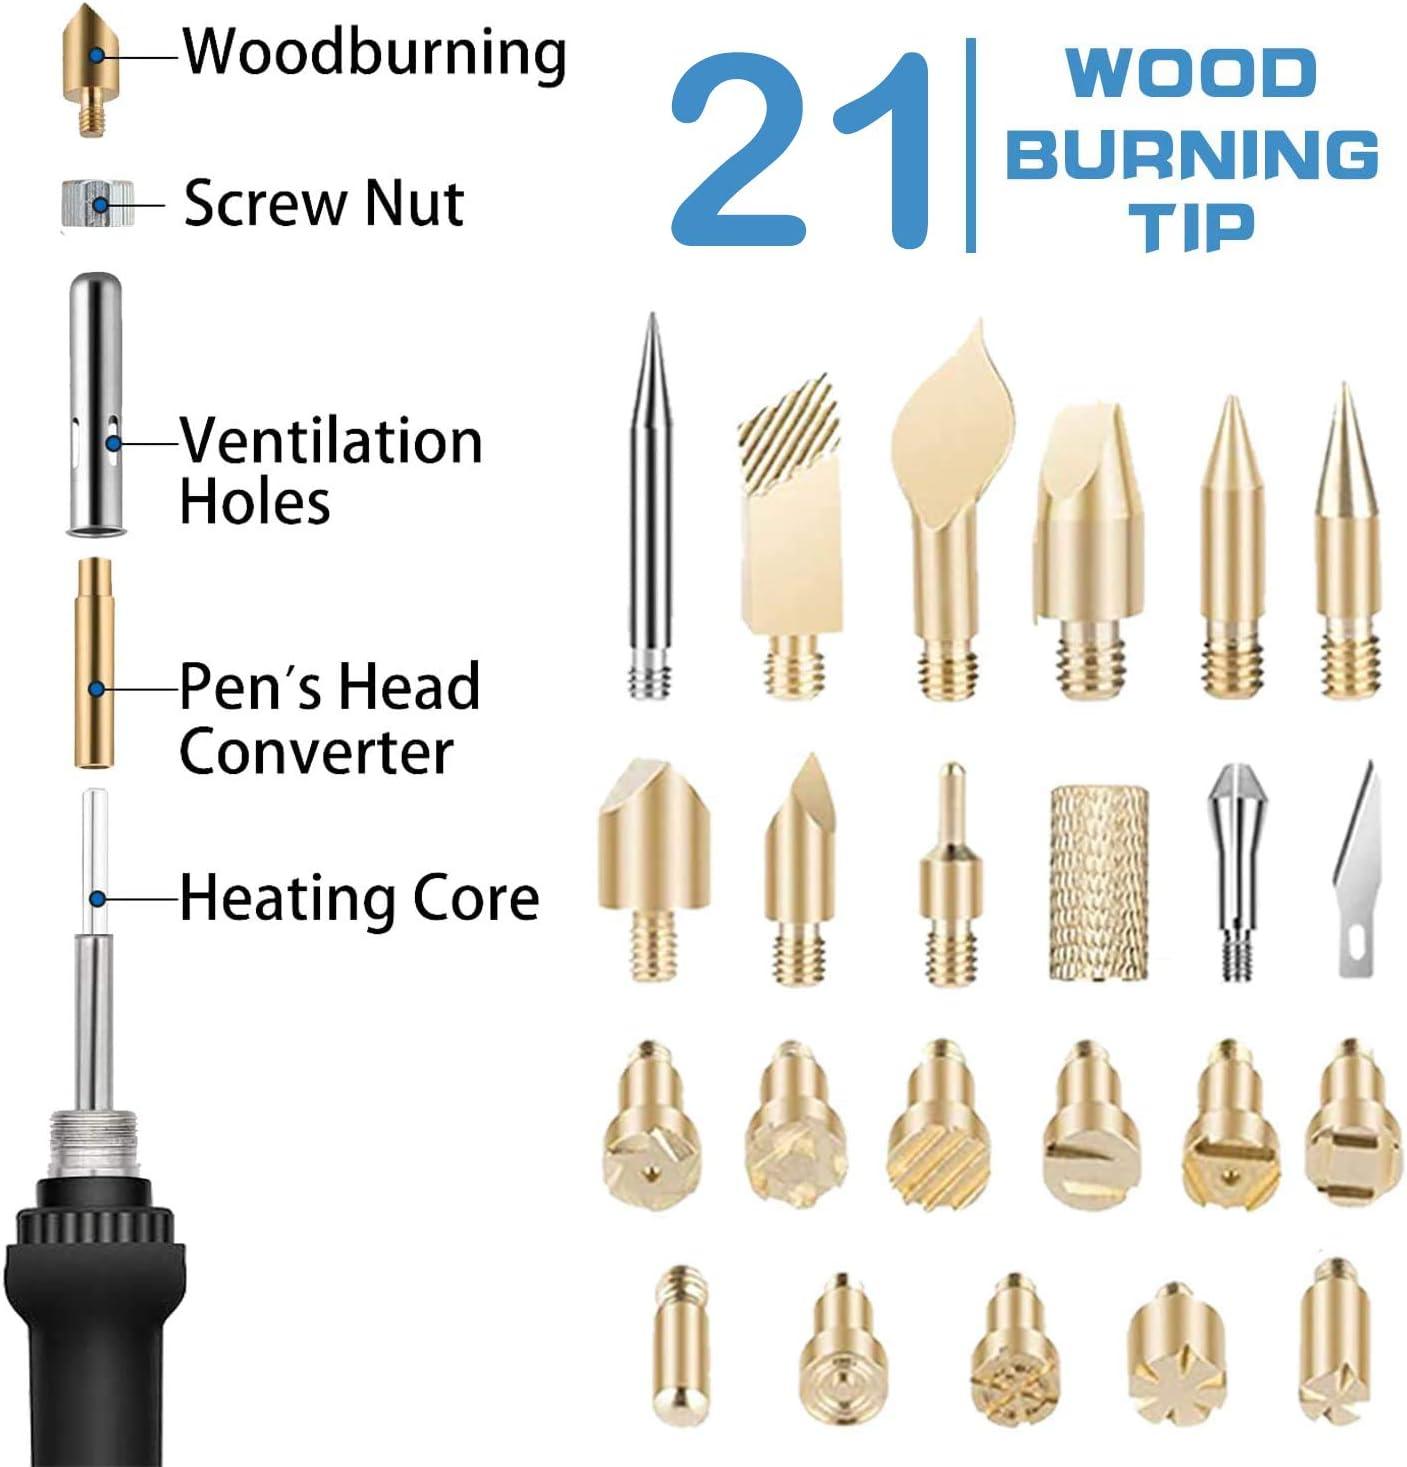 Popular Woodburning Tips and Their Uses